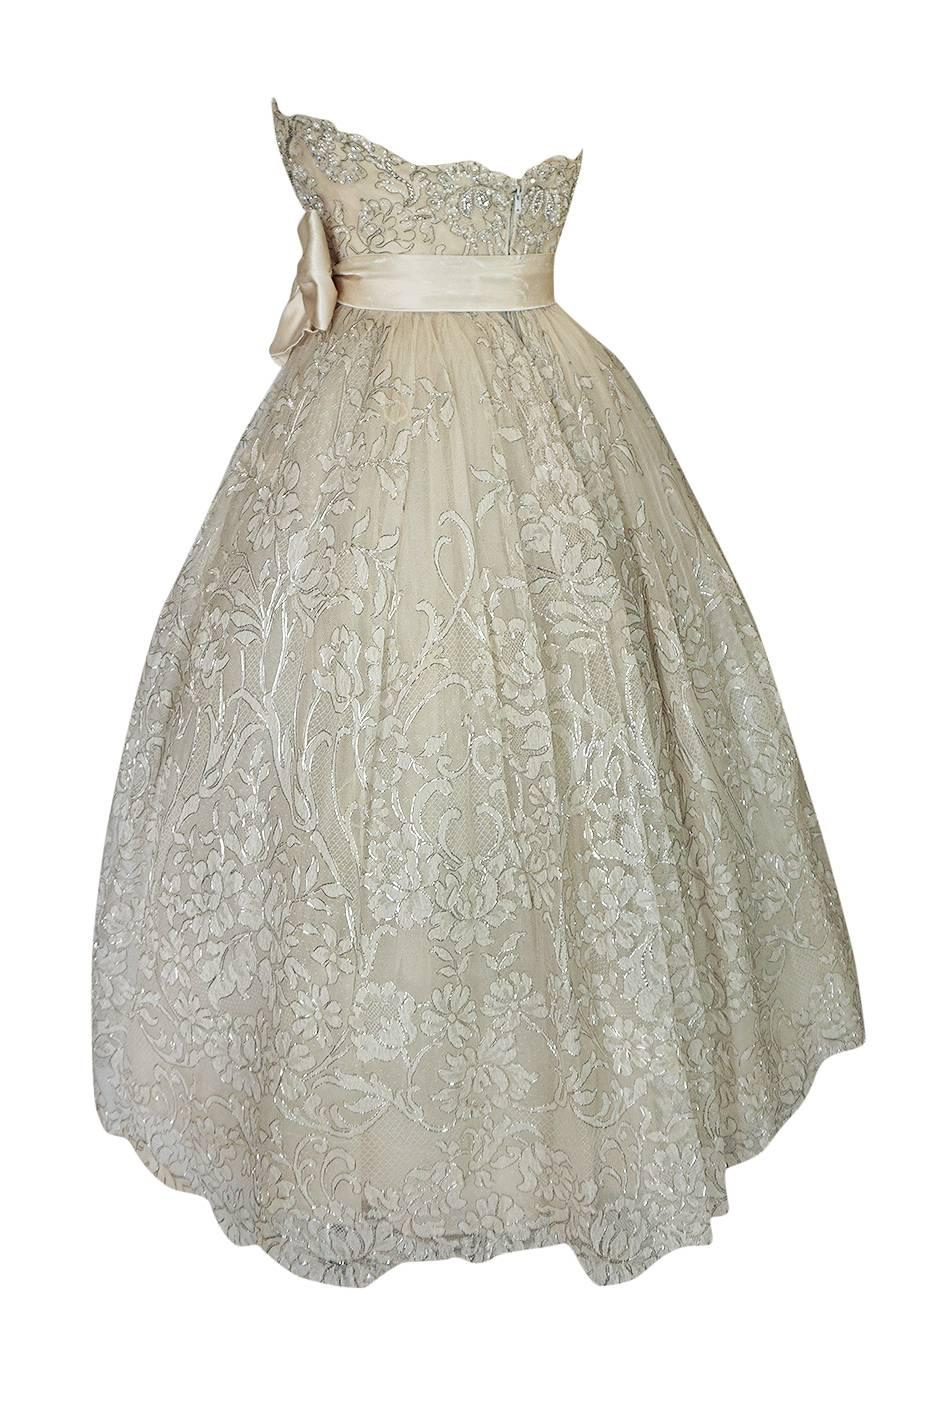 Spring 1959 Christian Dior Haute Couture Ivory and Silver Lace Dress at ...